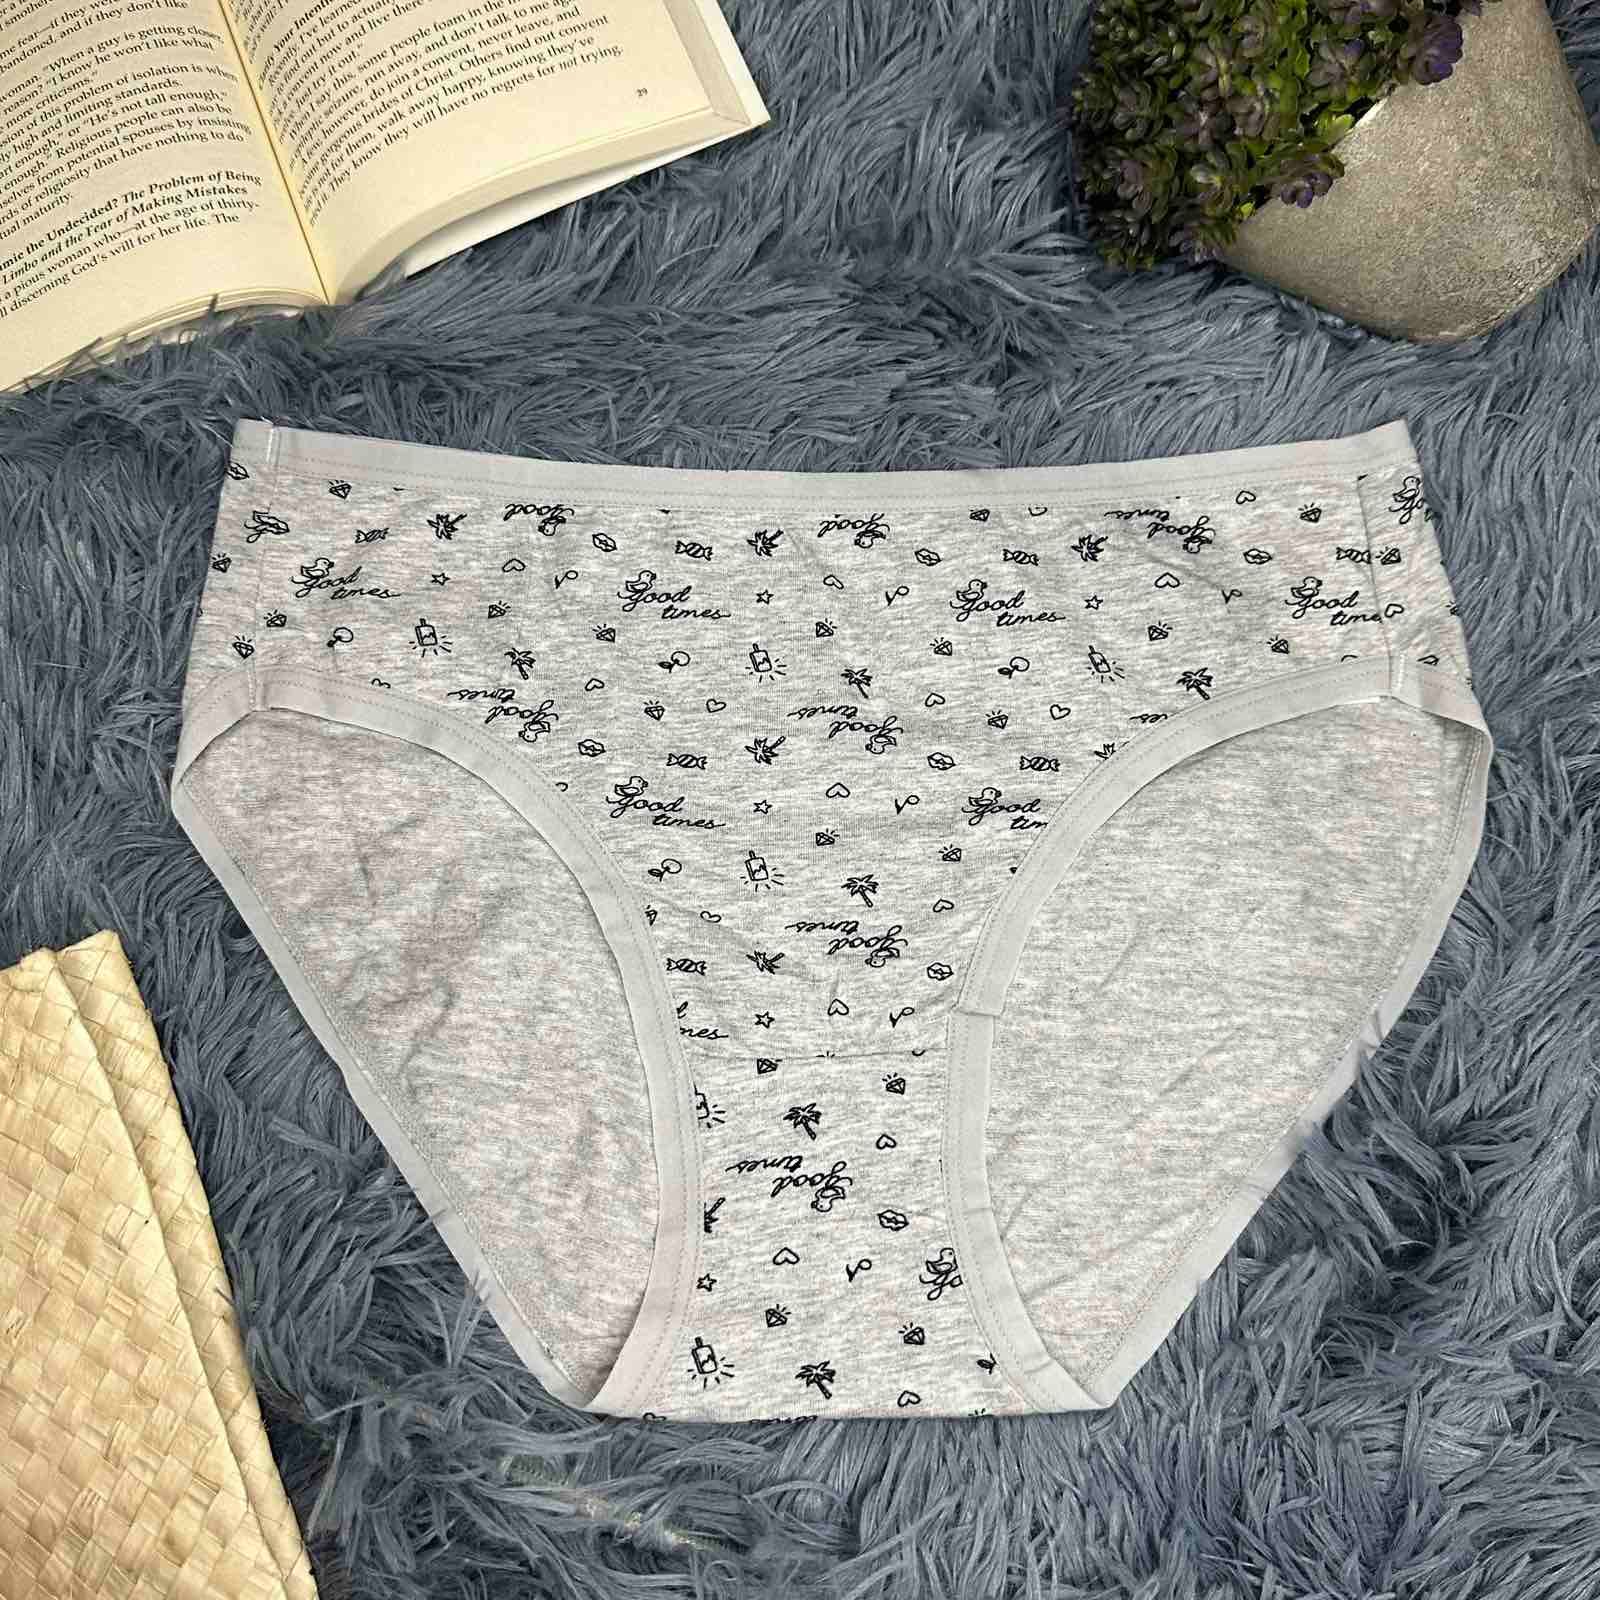 Lira Women's Panty Antimicrobial Cotton Full Panty High Quality Underwear  Cotton and Spandex Women's Underwear Large 2 Colors Abdominal Underpants